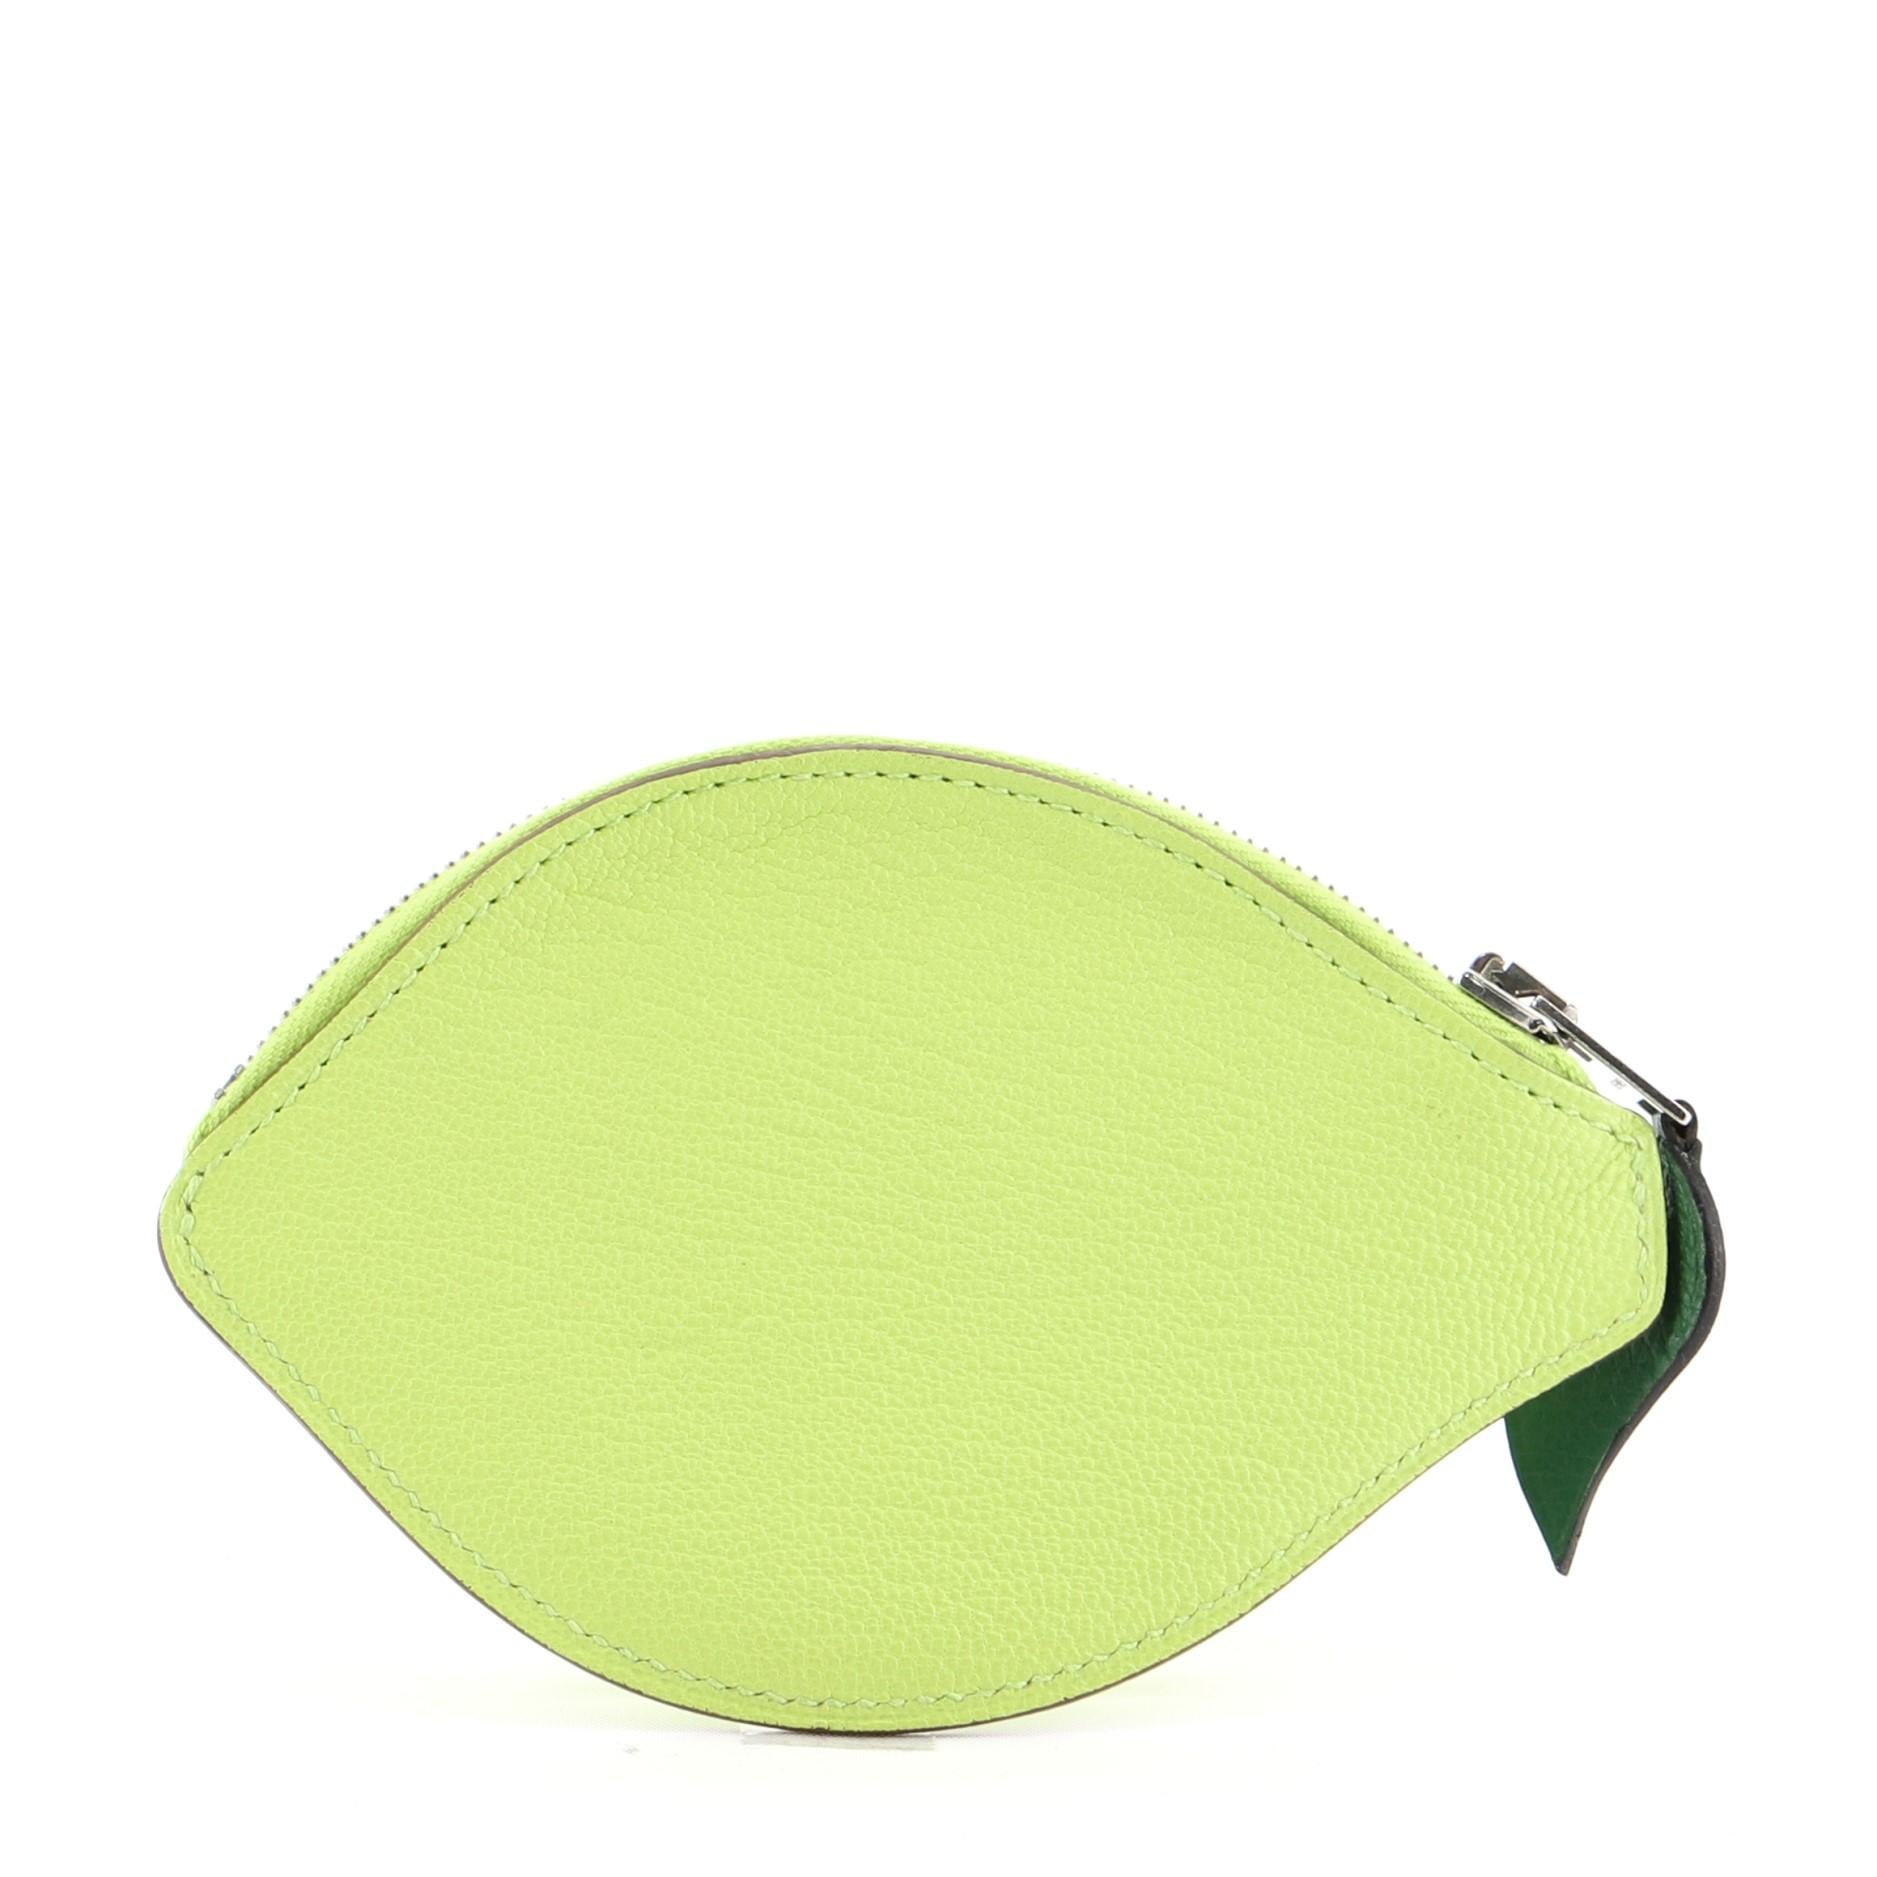 Hermes Tutti Frutti Wristlet Coin Purse Leather
Green Leather

Condition Details: Small indentation on rear, scratches on hardware.

50592MSC

Height 3.5